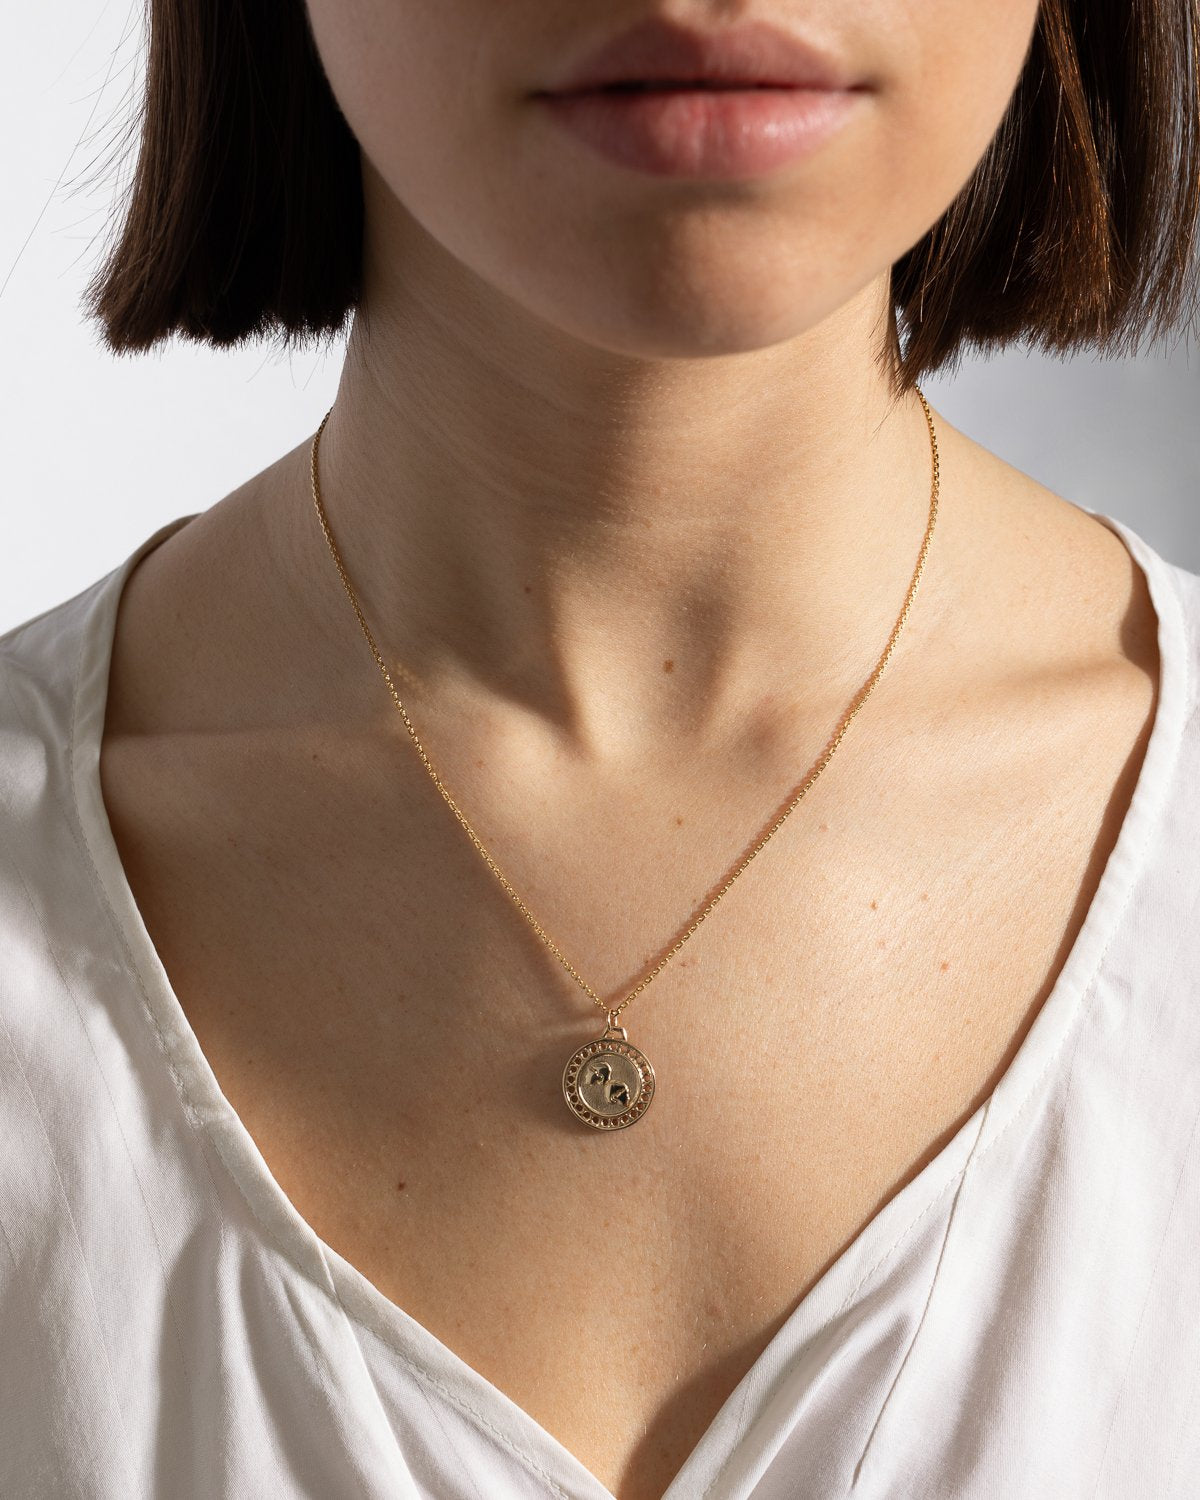 Zodiac Pisces Necklace in Yellow Gold